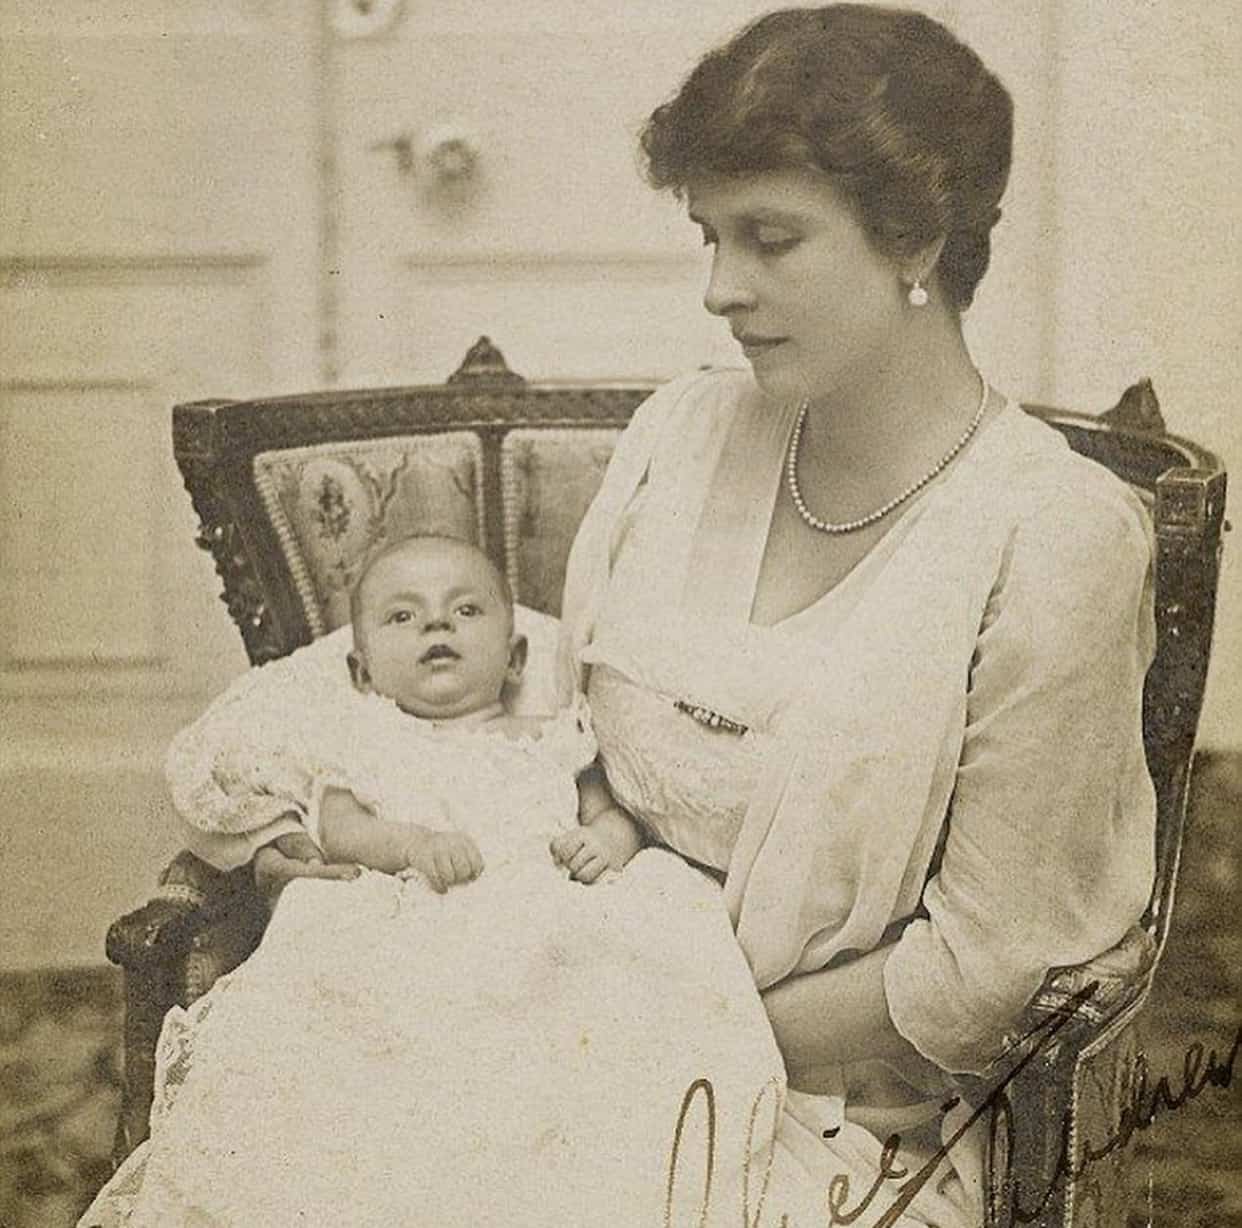 Prince Philip of Greece held by his mother Princess Alice of Denmark